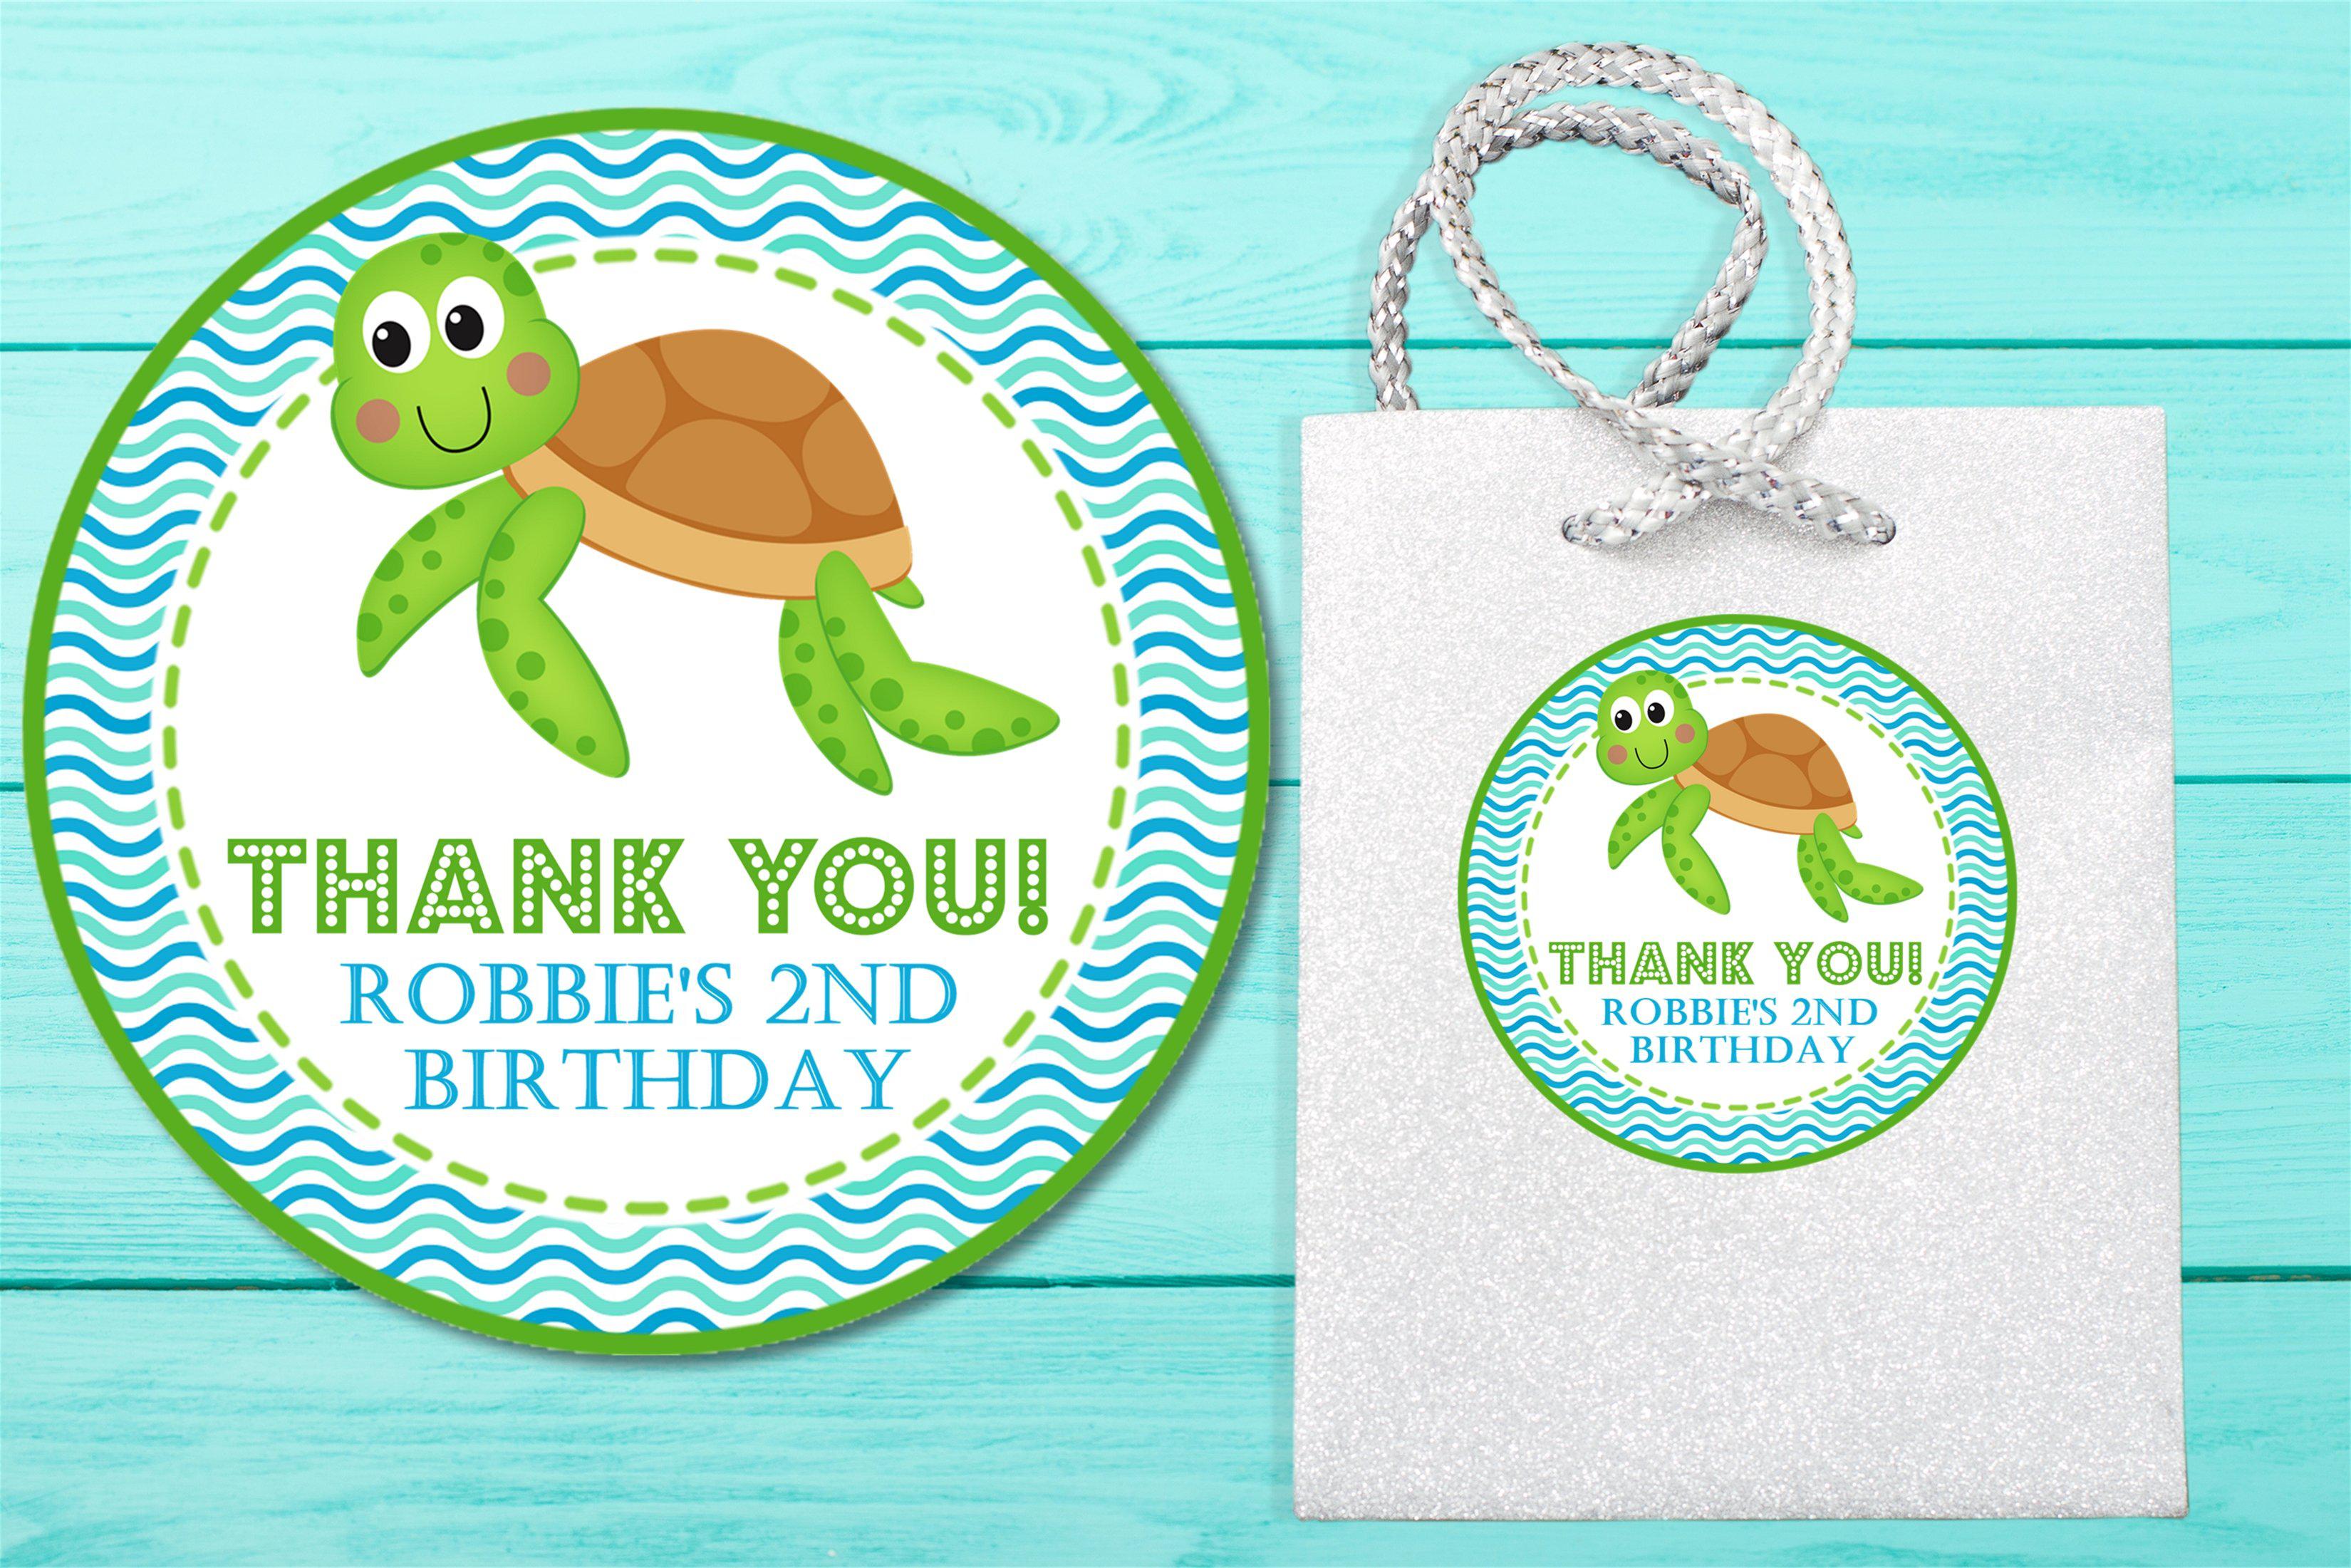 Sea Turtle Under The Sea Birthday Party Stickers or Favor Tags